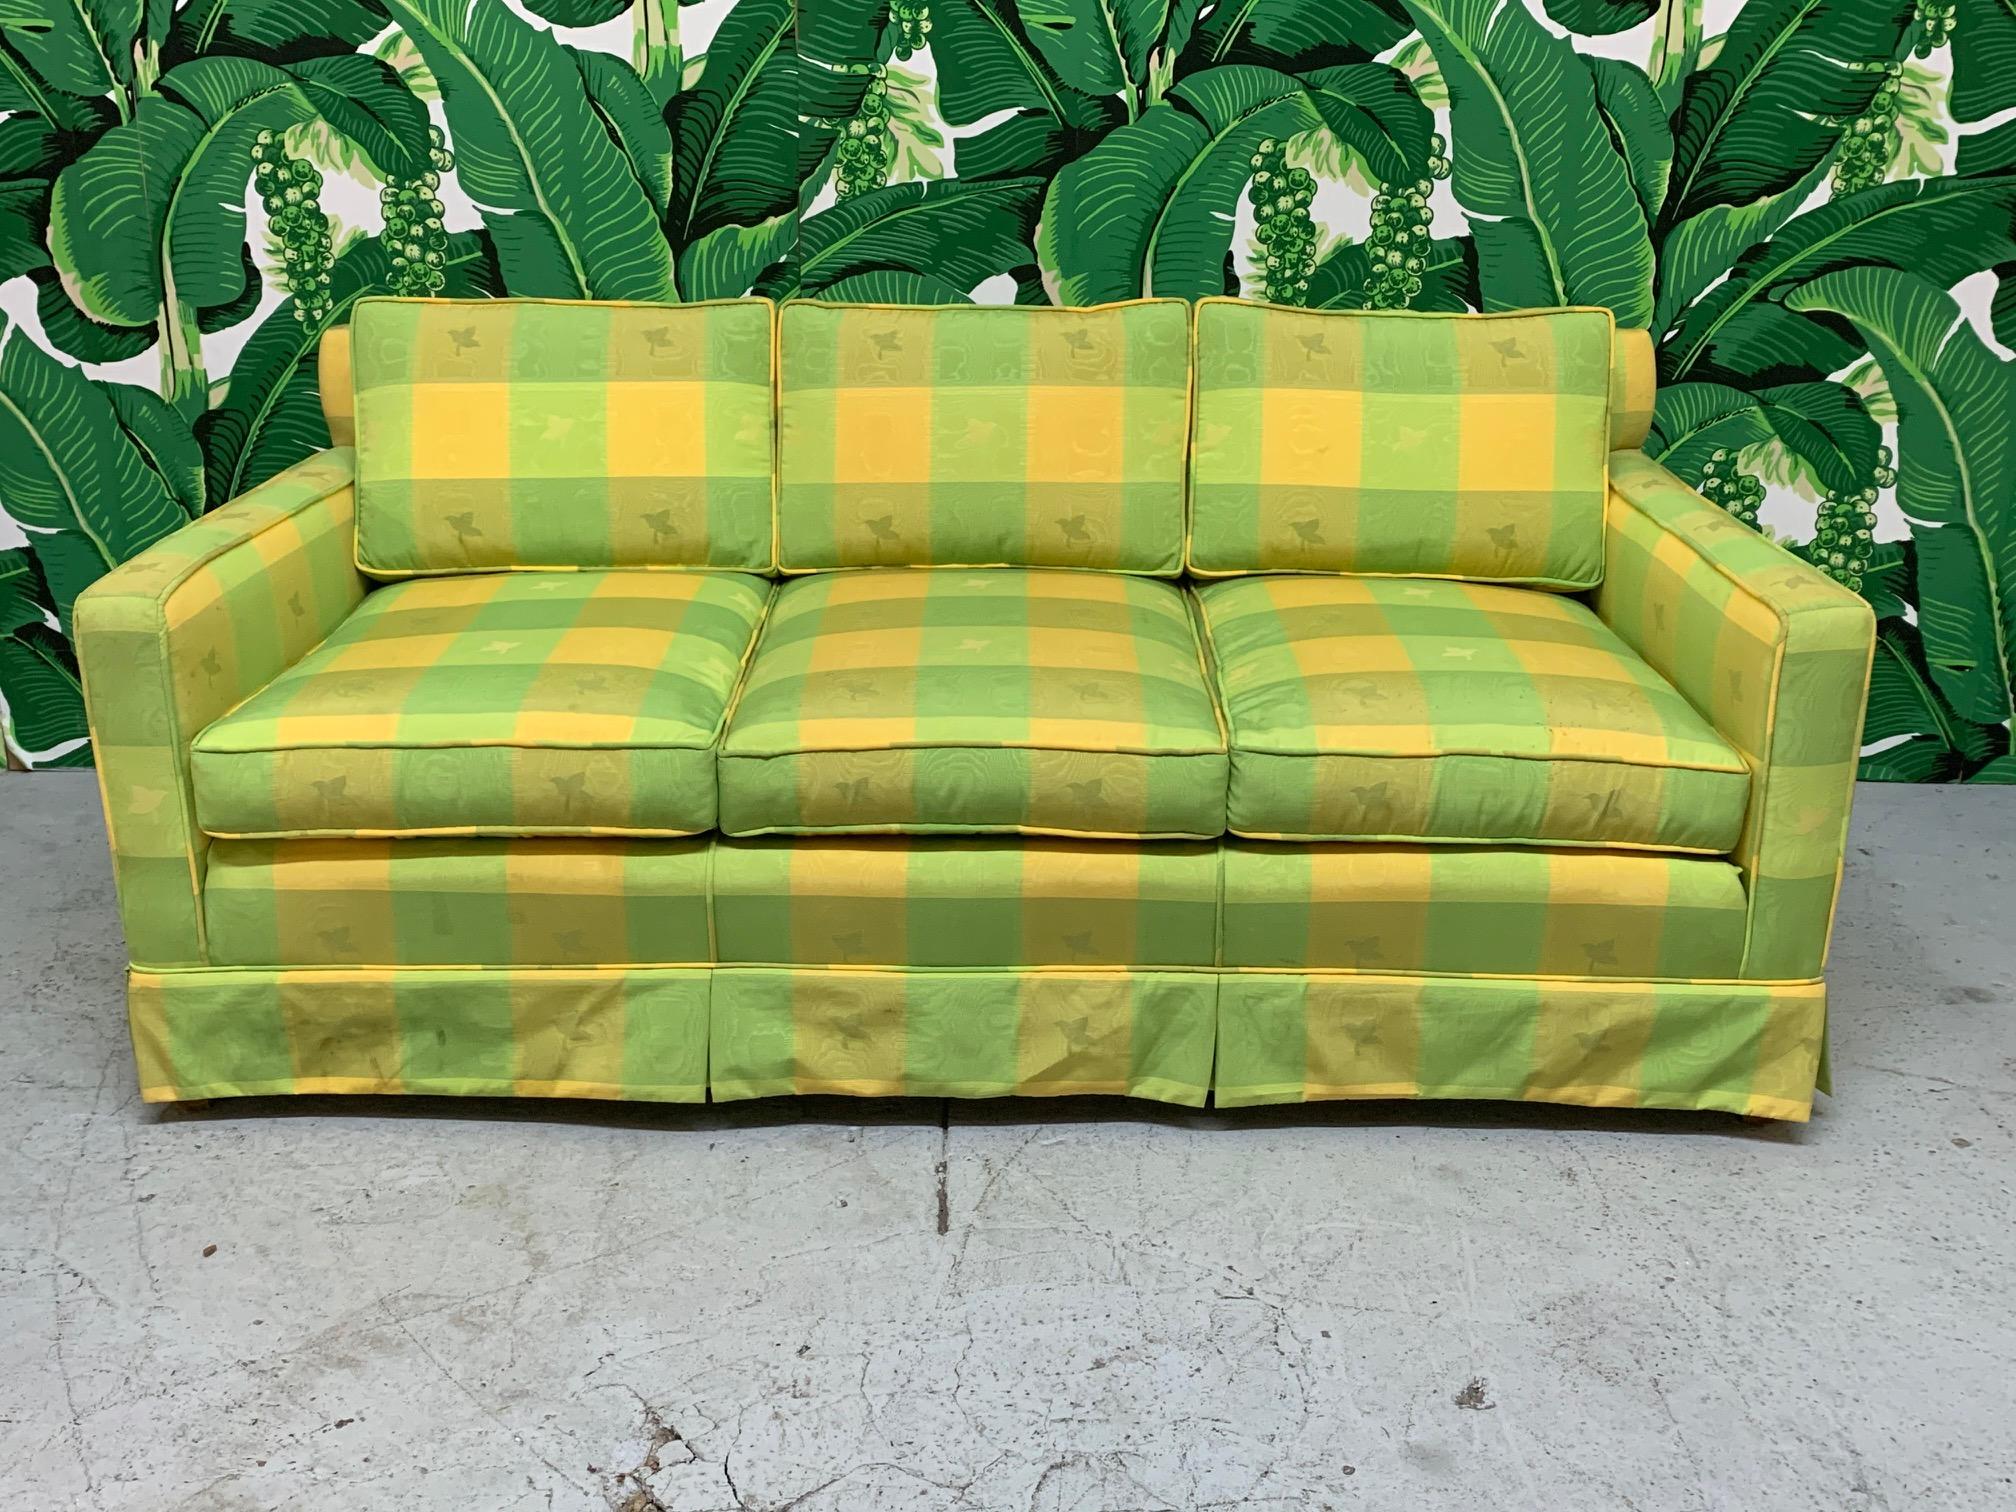 Vintage green and yellow plaid sofa in the manner of Dorothy Draper. Cheerful and fun print that will add a bright touch to any decor. Very good condition structurally and cosmetically with no stains or tears to fabric.